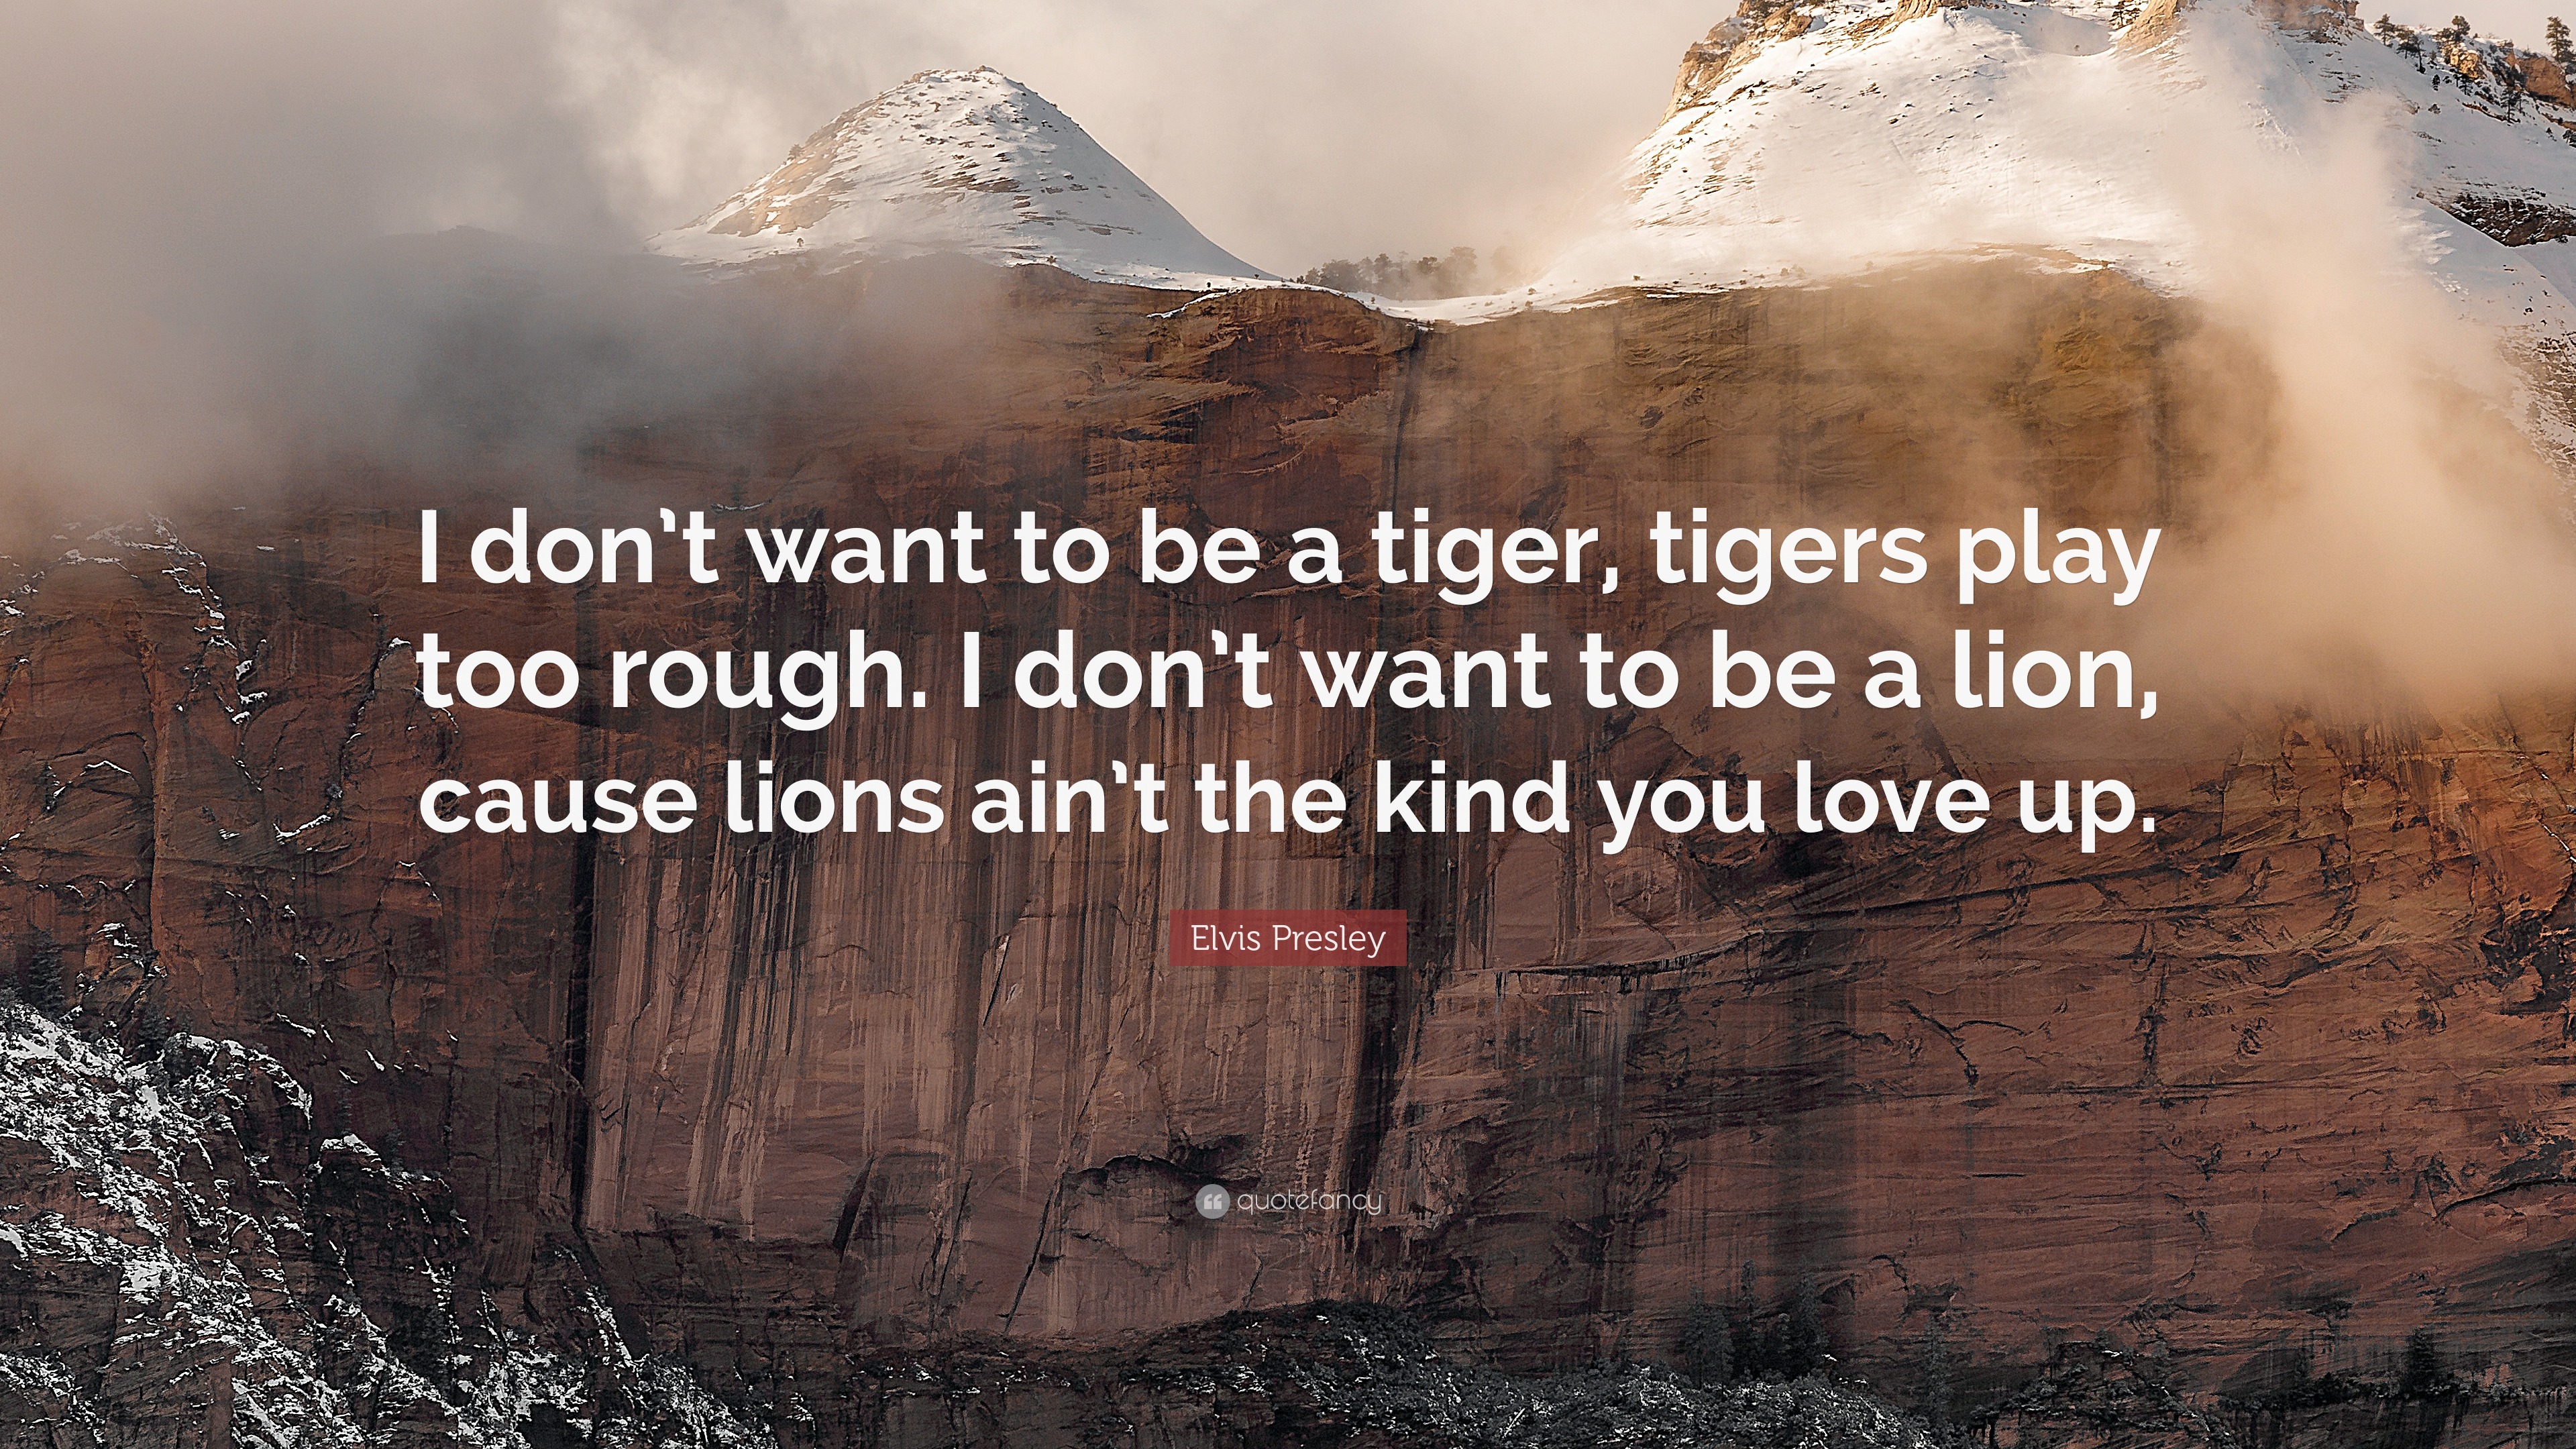 Elvis Presley Quote “I don t want to be a tiger tigers